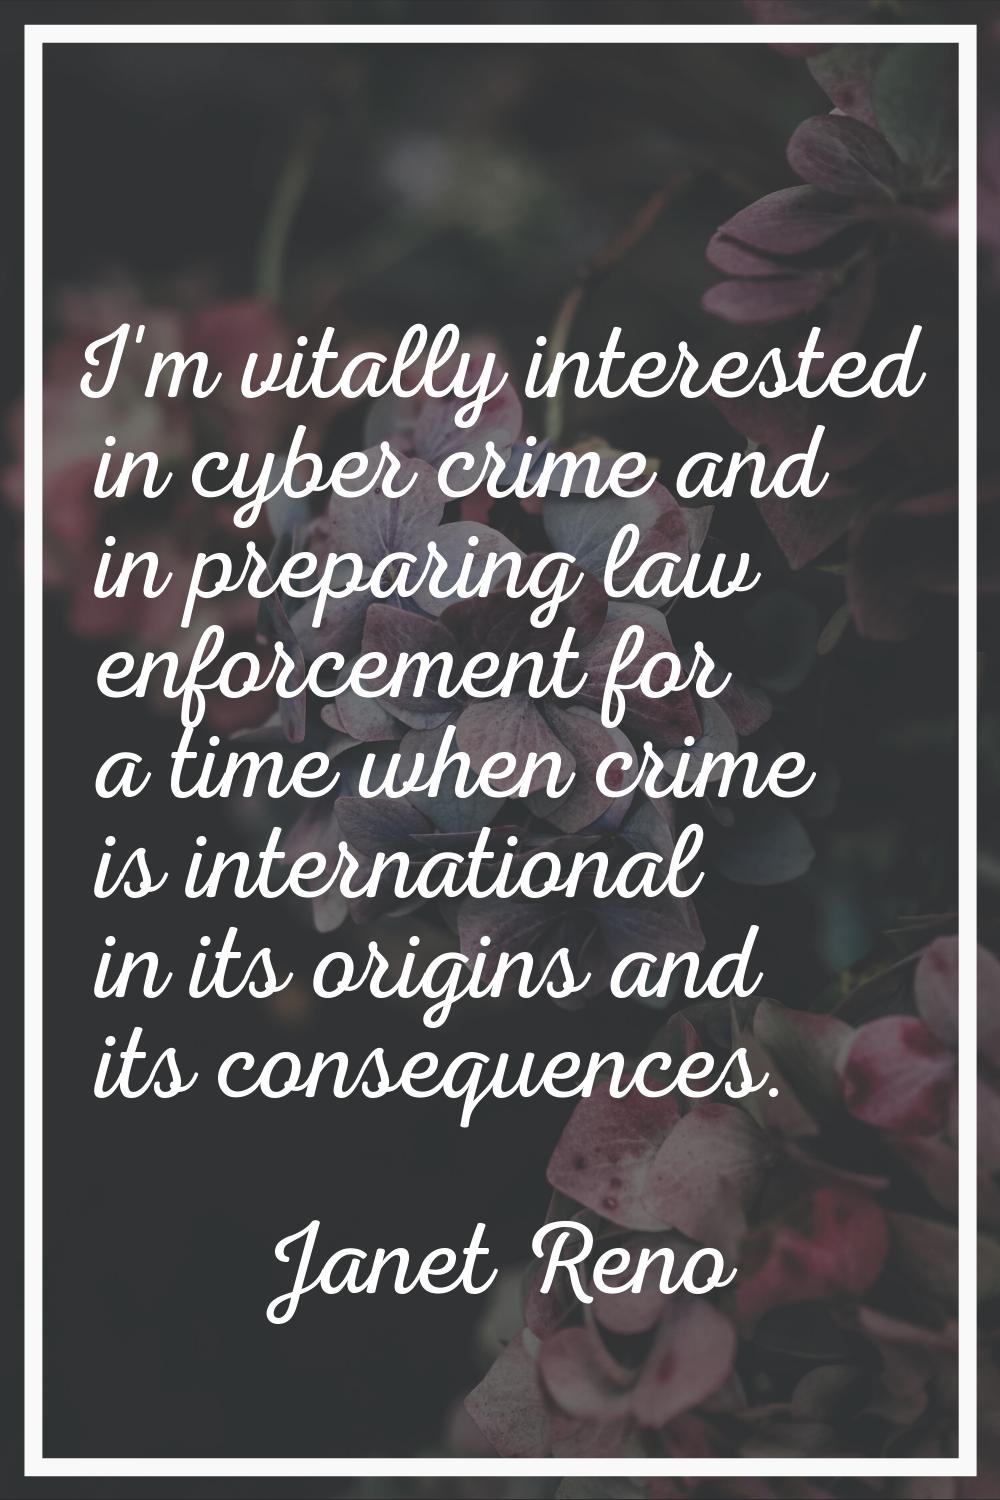 I'm vitally interested in cyber crime and in preparing law enforcement for a time when crime is int